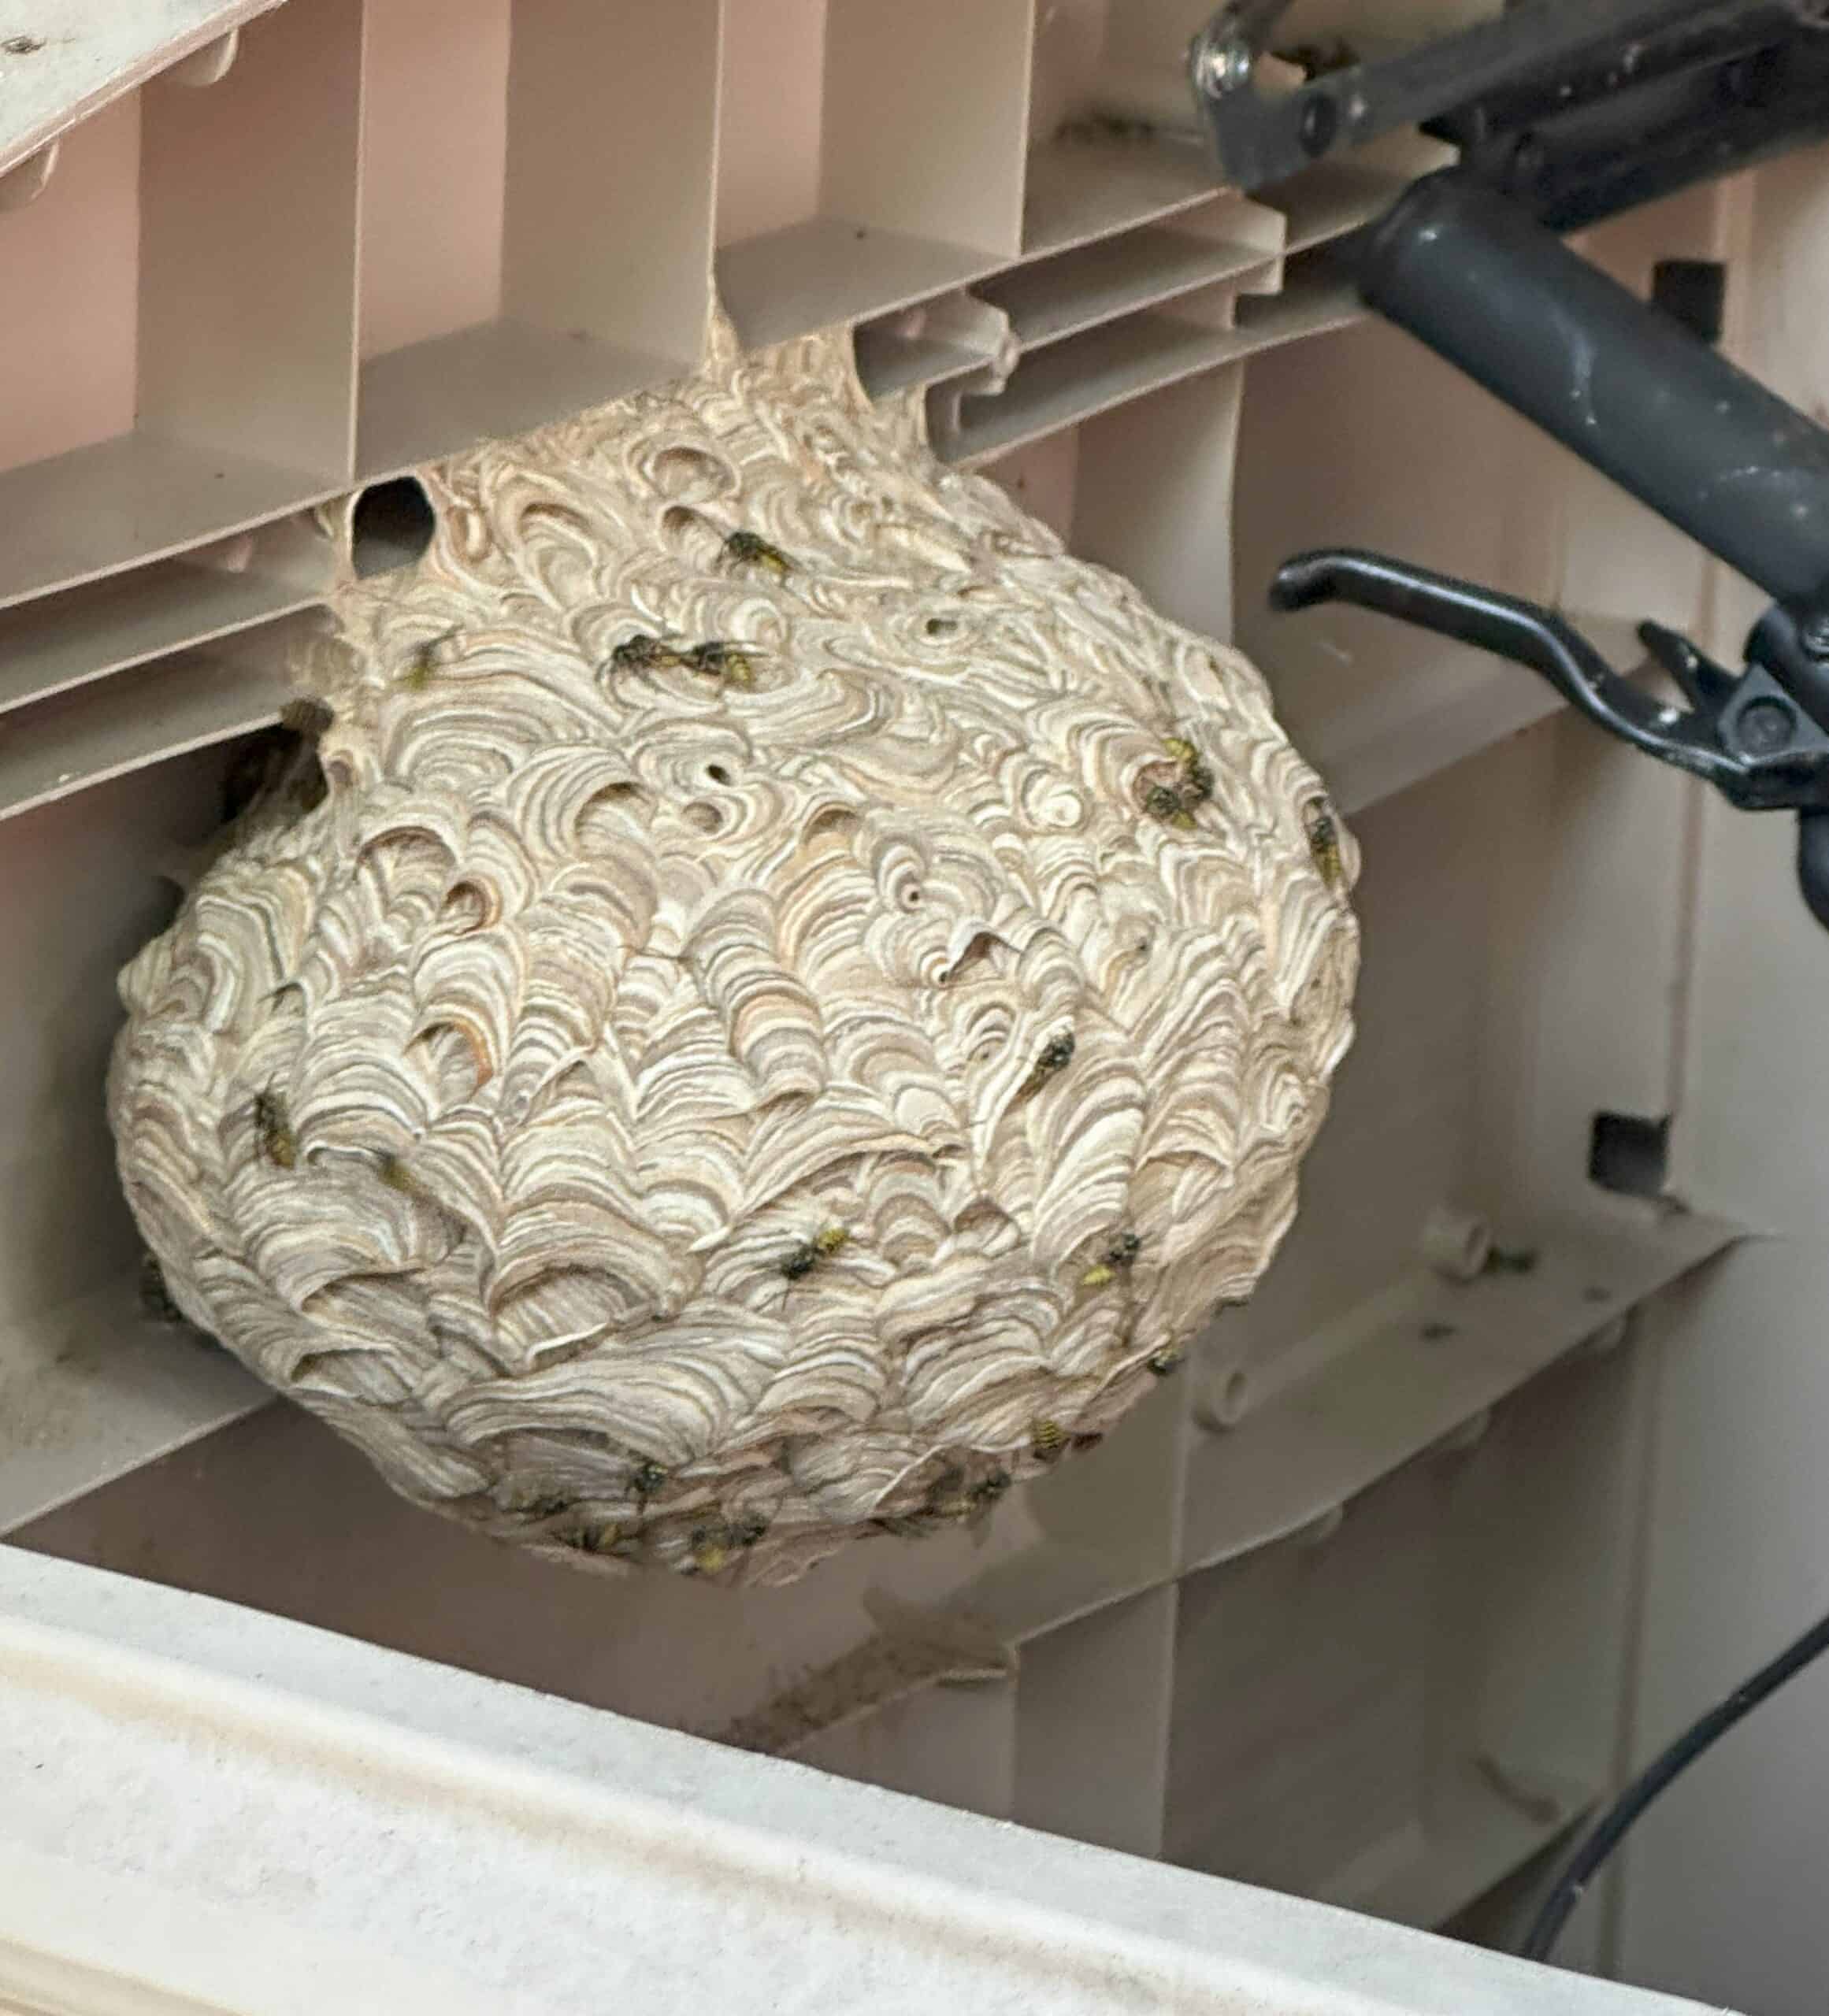 Wasp Nest in Garden shed